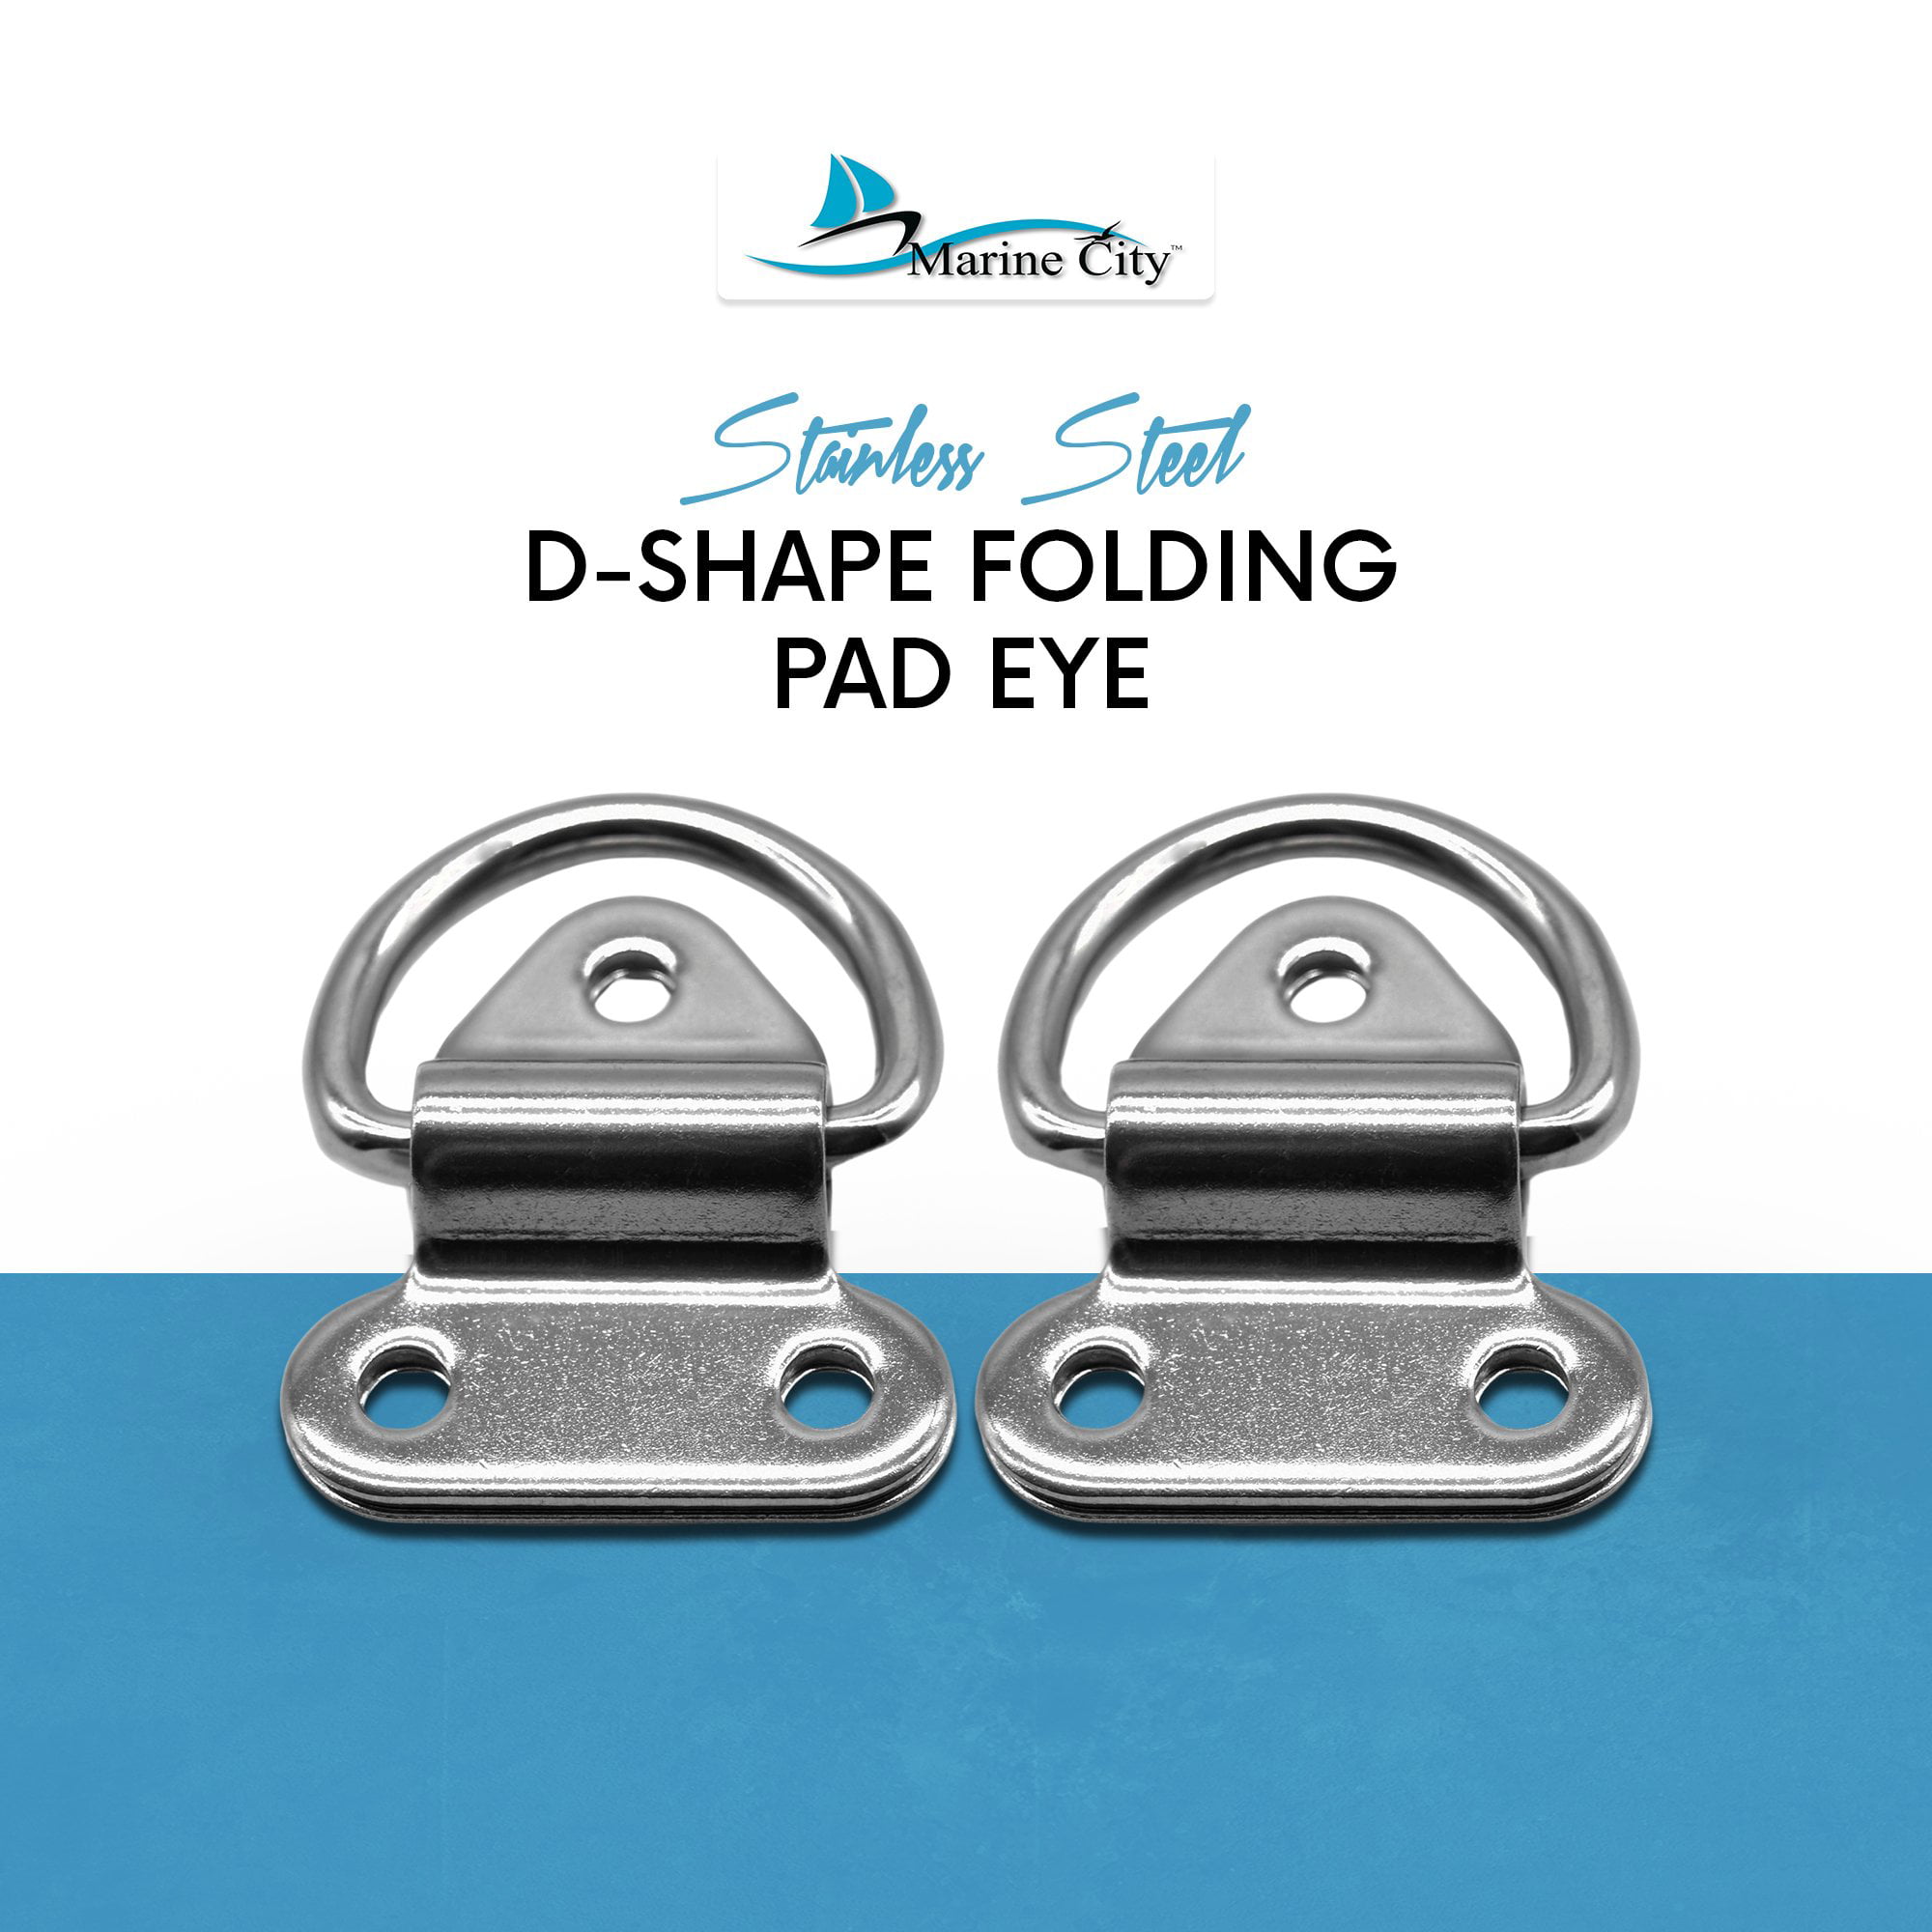 Four sets of Marine Grade Stainless Steel Folding Pad Eye 1/4" 